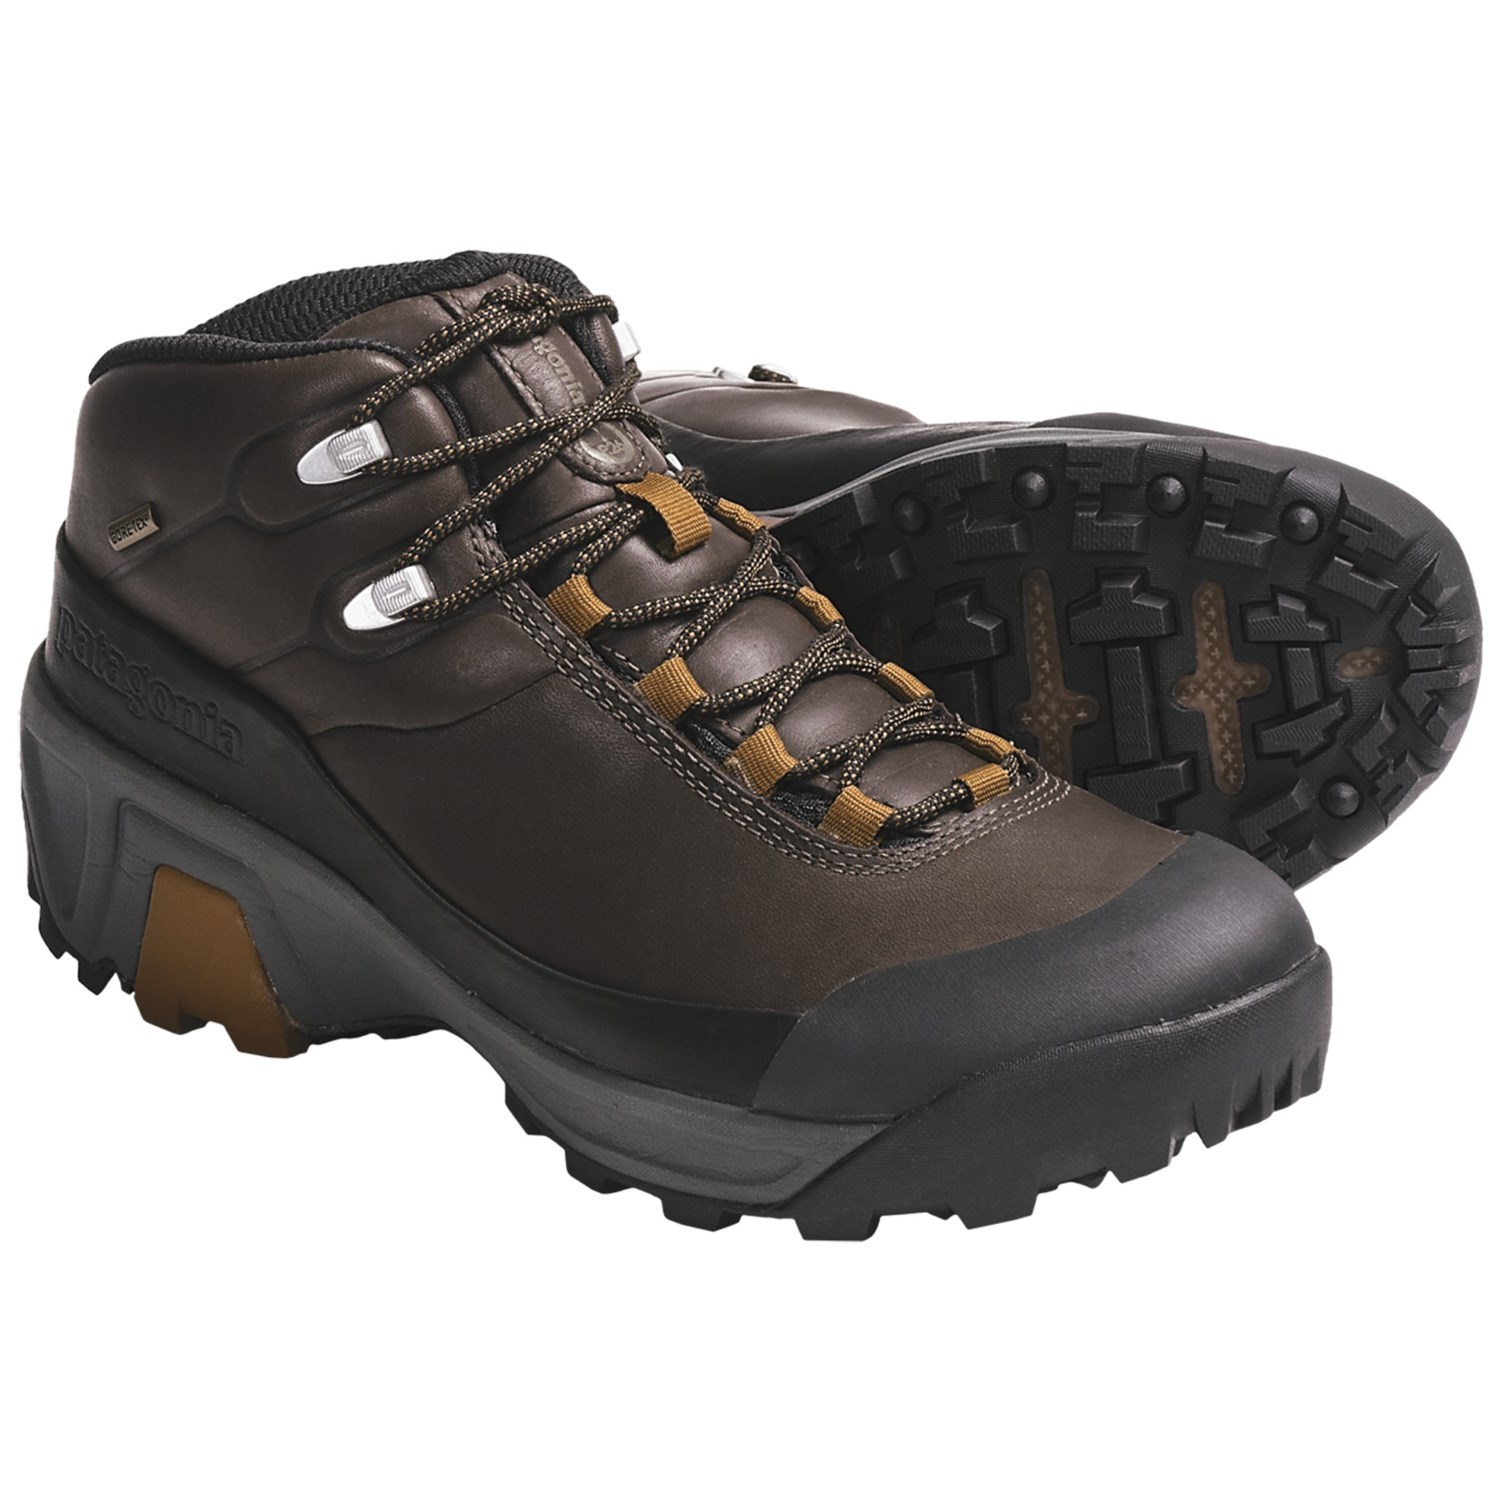 MEN 039 S Patagonia P26 MID Gore TEX T80501 French Roast Hiking Boot | eBay